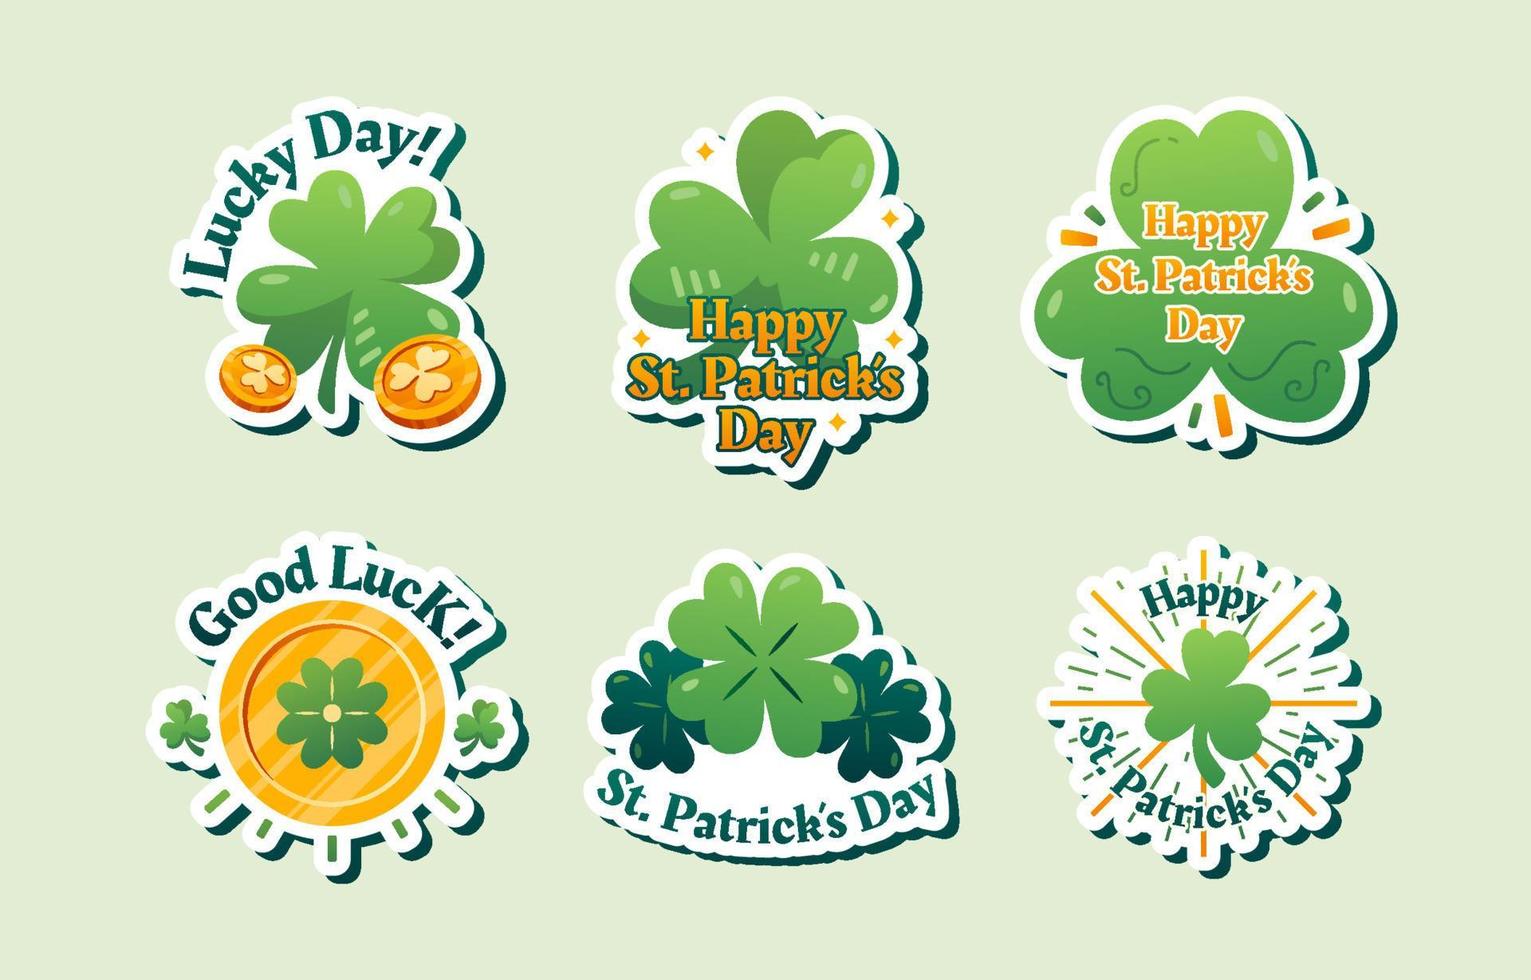 Happy St Patrick's Day Sticker Collection vector